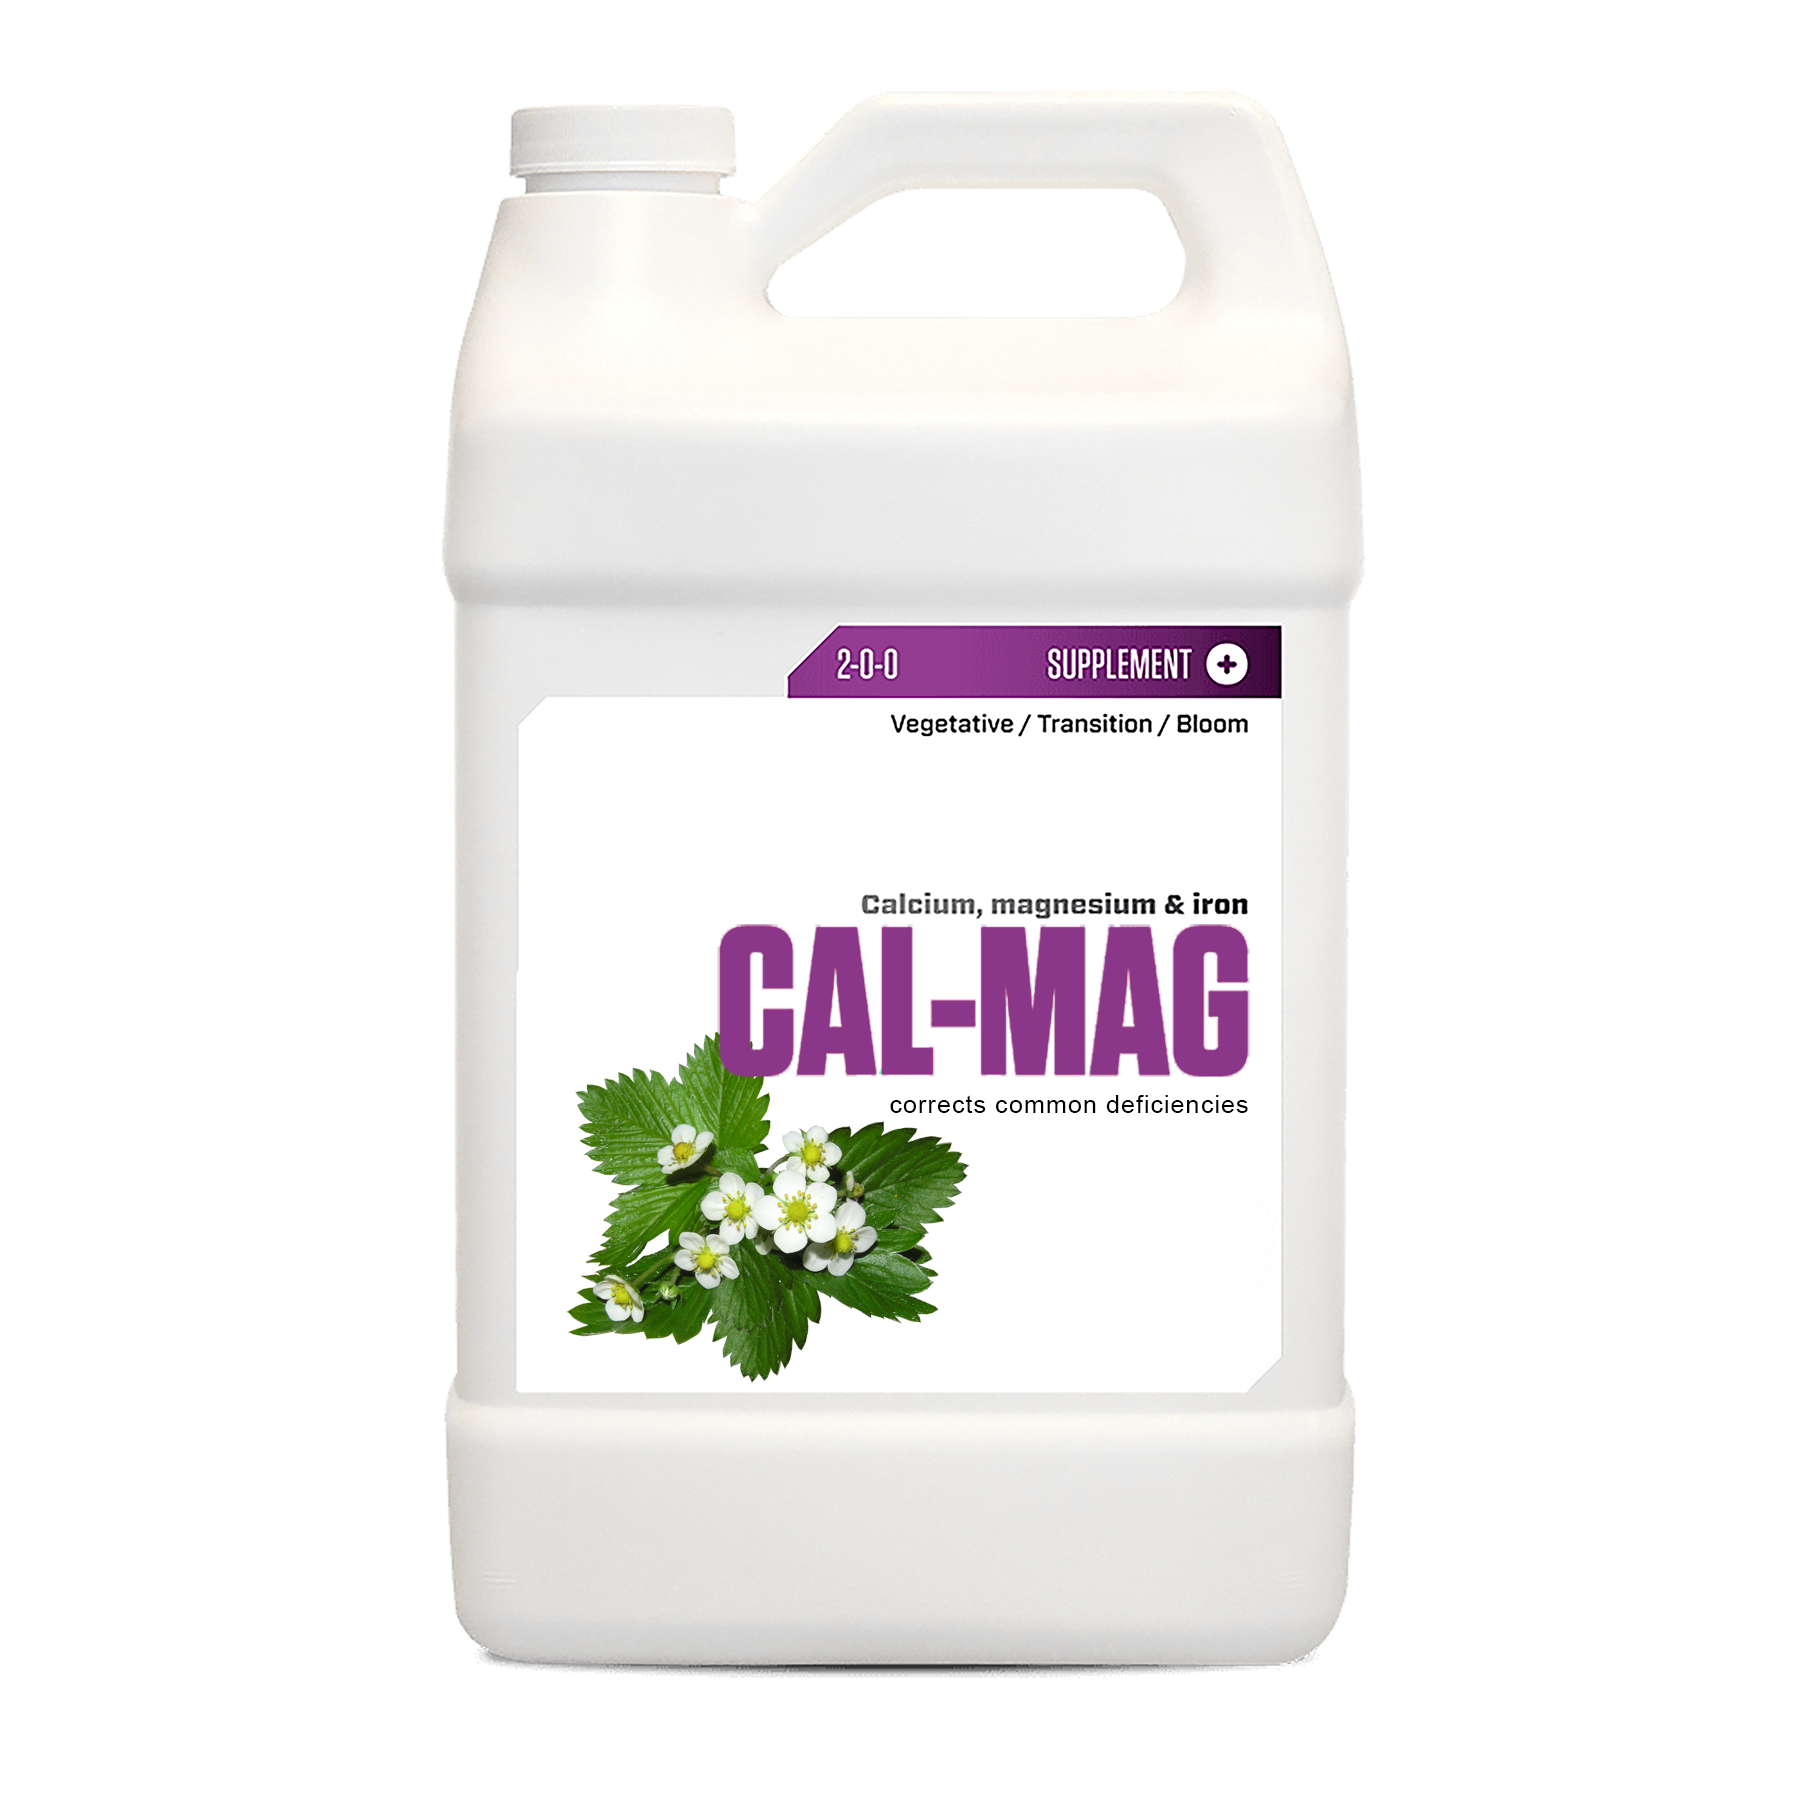 Cal-Mag nutrient supplement